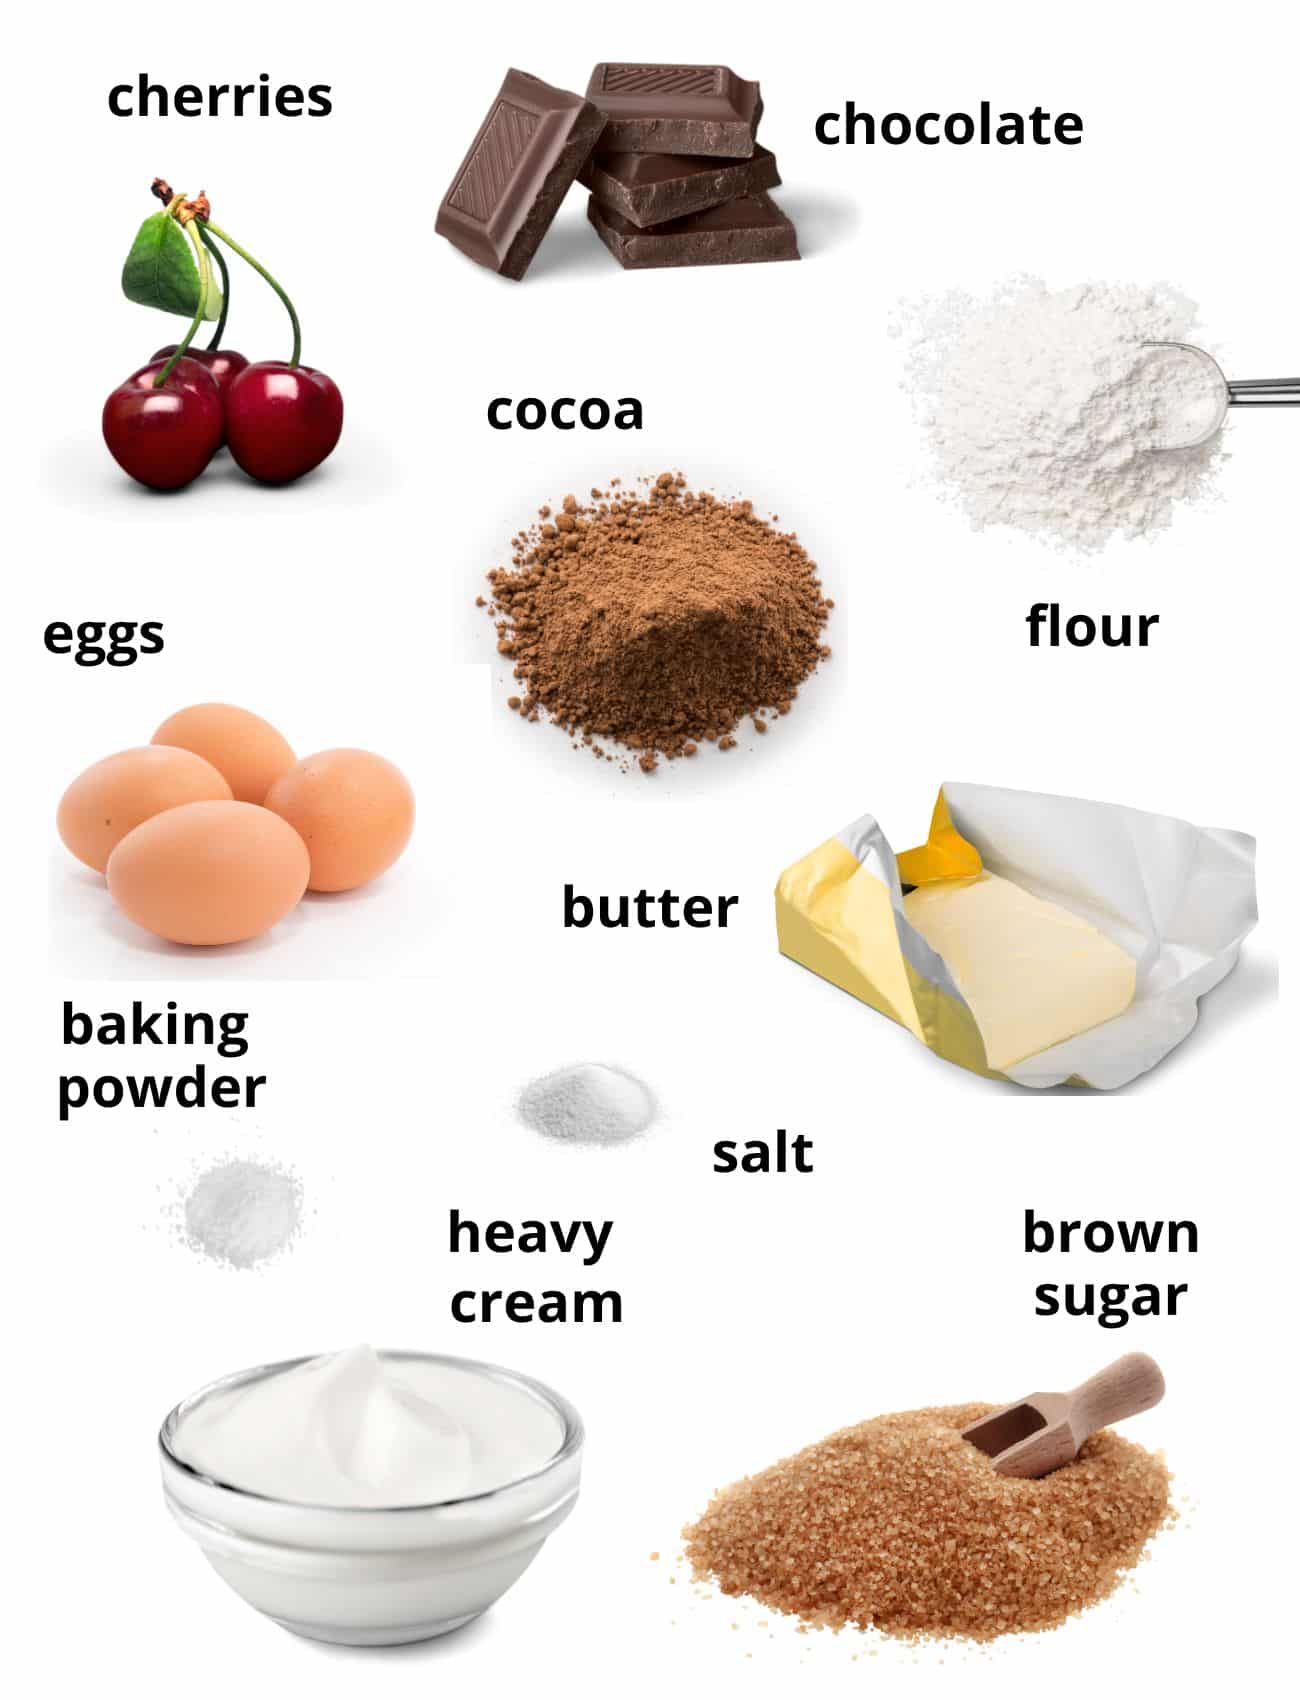 ingredients for making cherry brownies with chocolate.